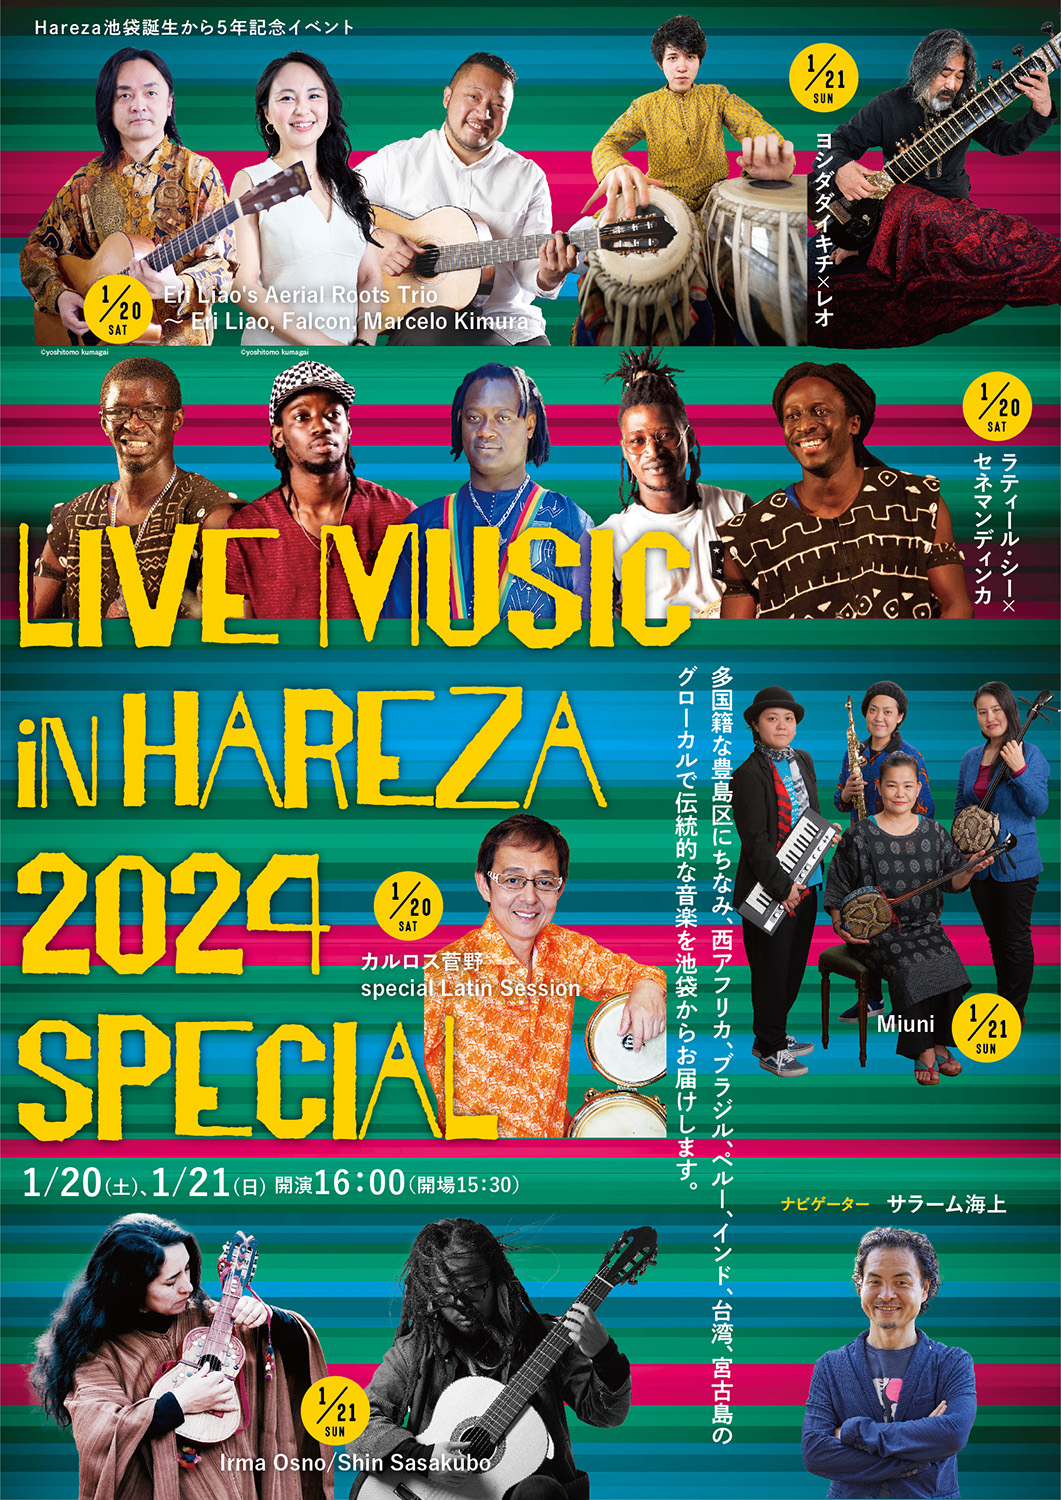 LIVE MUSIC in HAREZA 2024 SPECIAL